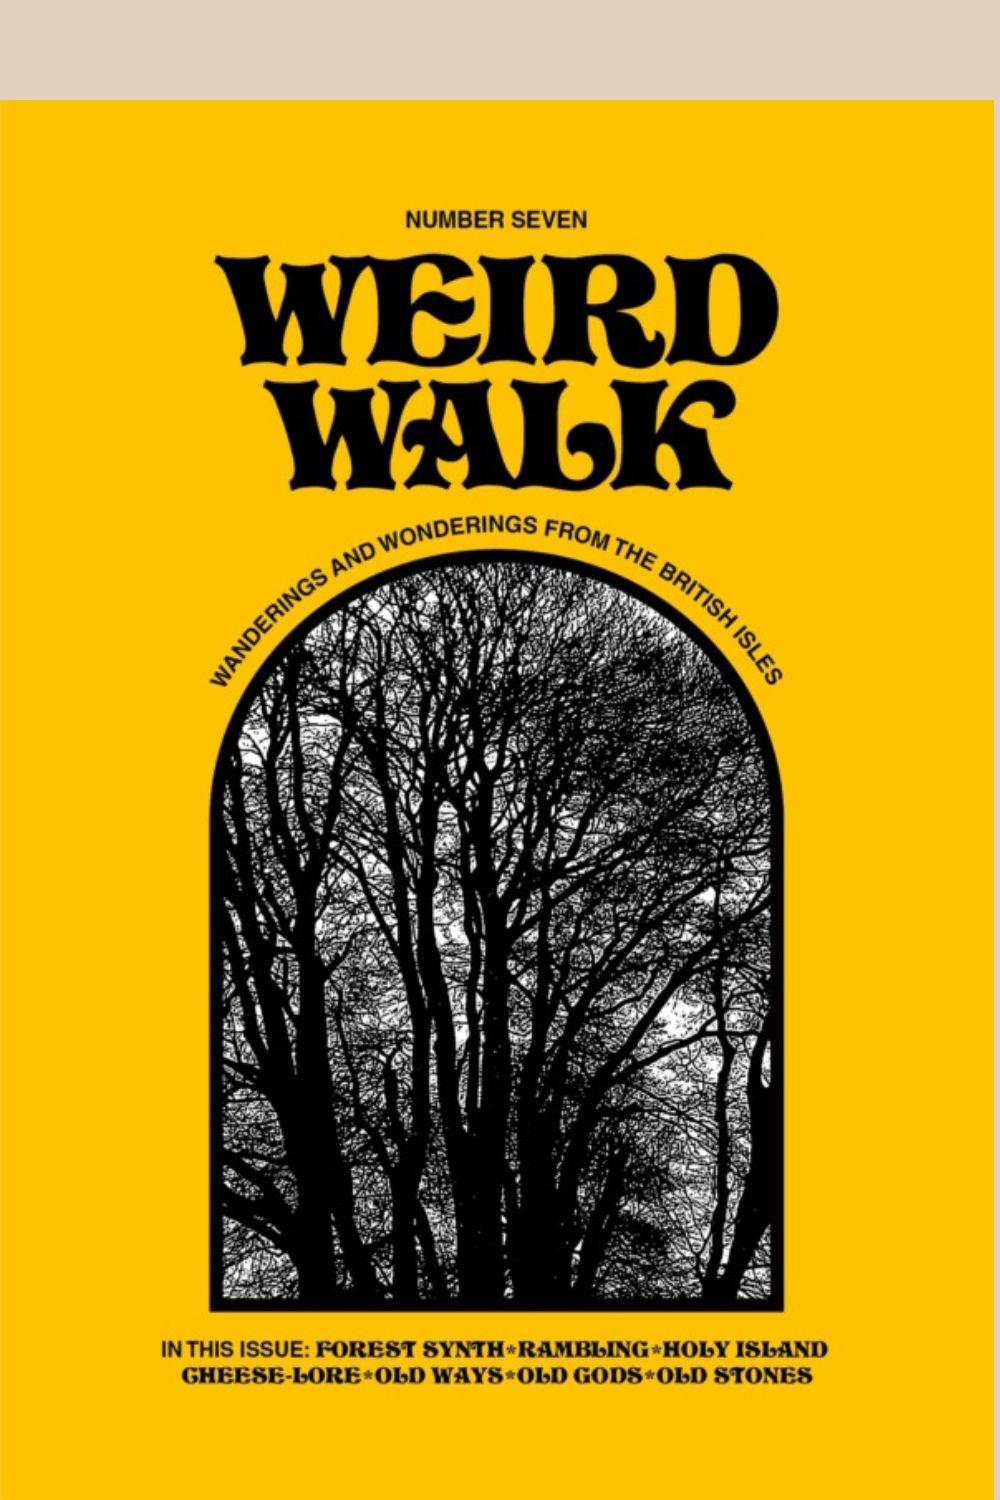 Weird Walk Zine issue 7 cover. Yello background with monochrome trees.